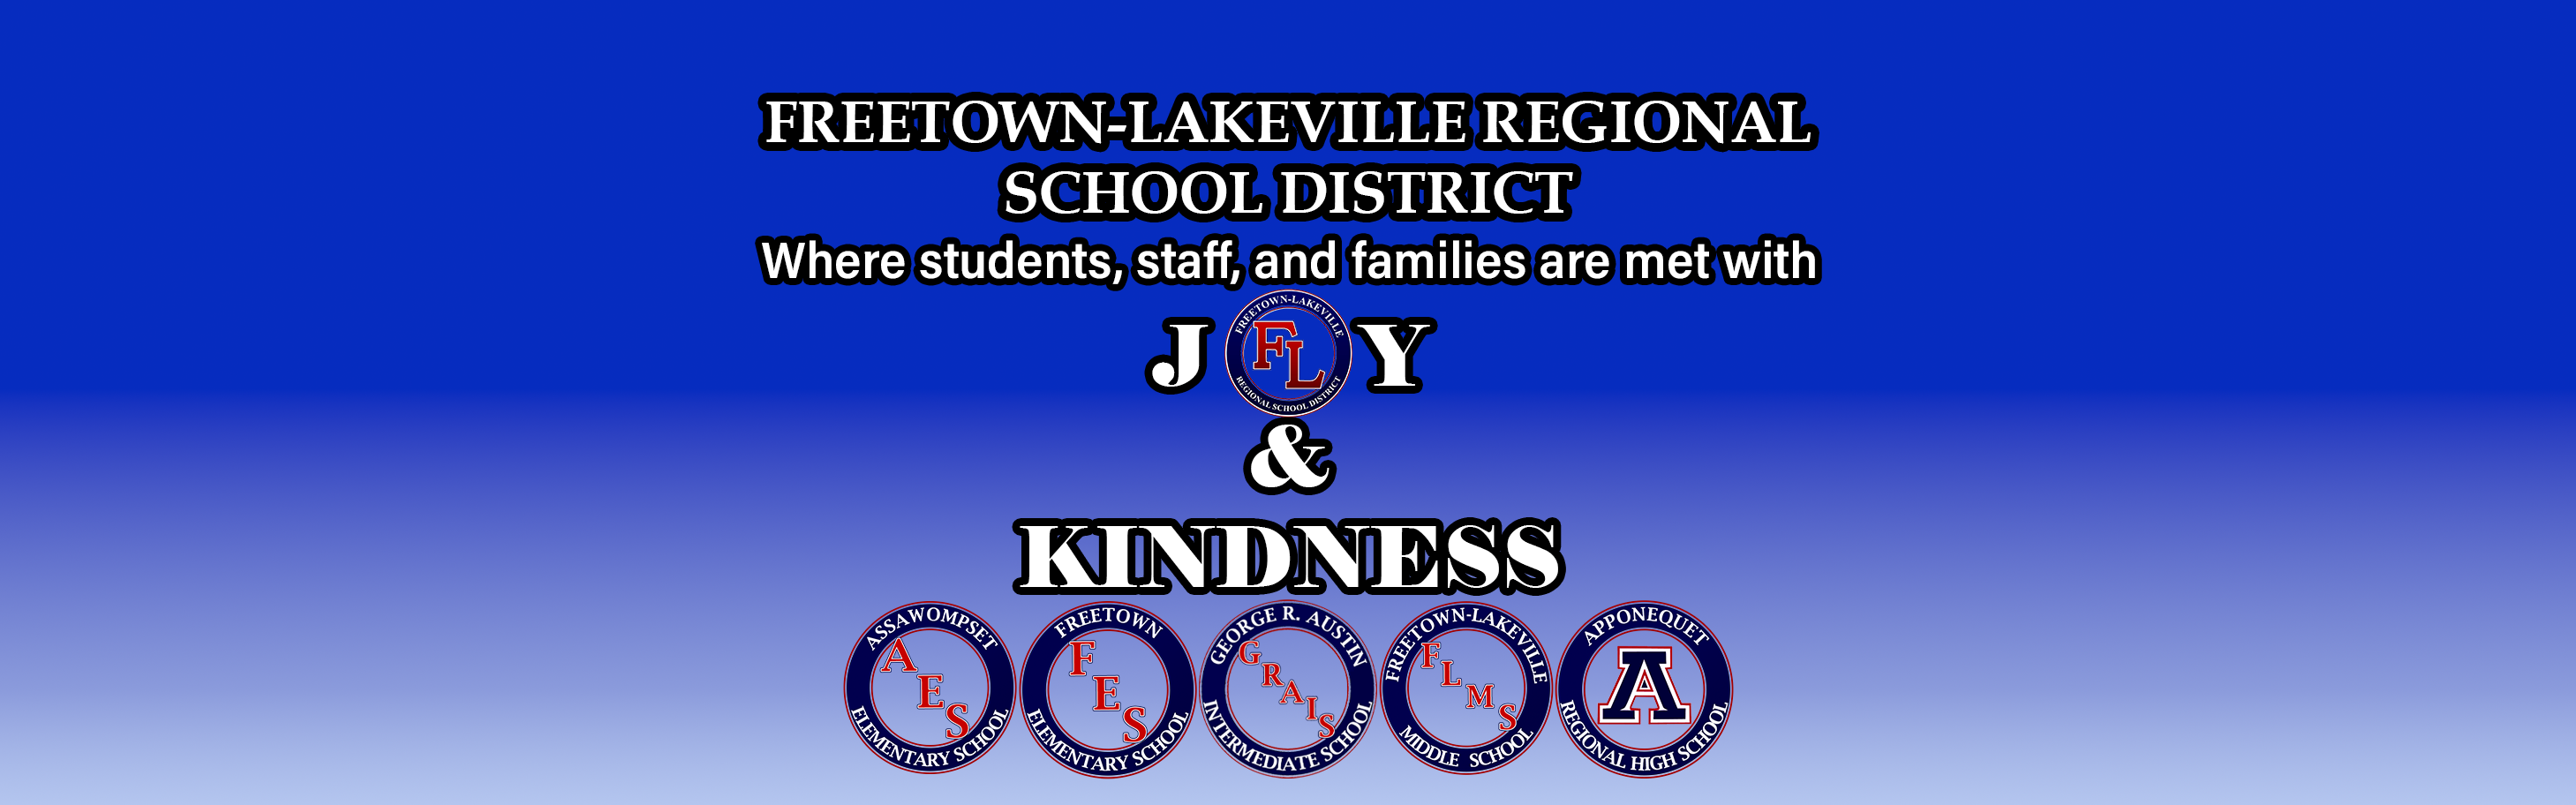 Regional Website Banner - This Logo is of Freetown-Lakeville Regional School District JOY & Kindness Banner . Freetown Lakeville "FL" Logo as O in Joy. Included is AES Logo for Assawompset elementary school, FES Logo for Freetown Elementary School, GRAIS Logo for George R Austin Intermediate school, FLMS Logo for Freetown-Lakeville Middle School and Apponequet A for Apponequet Regional Highschool